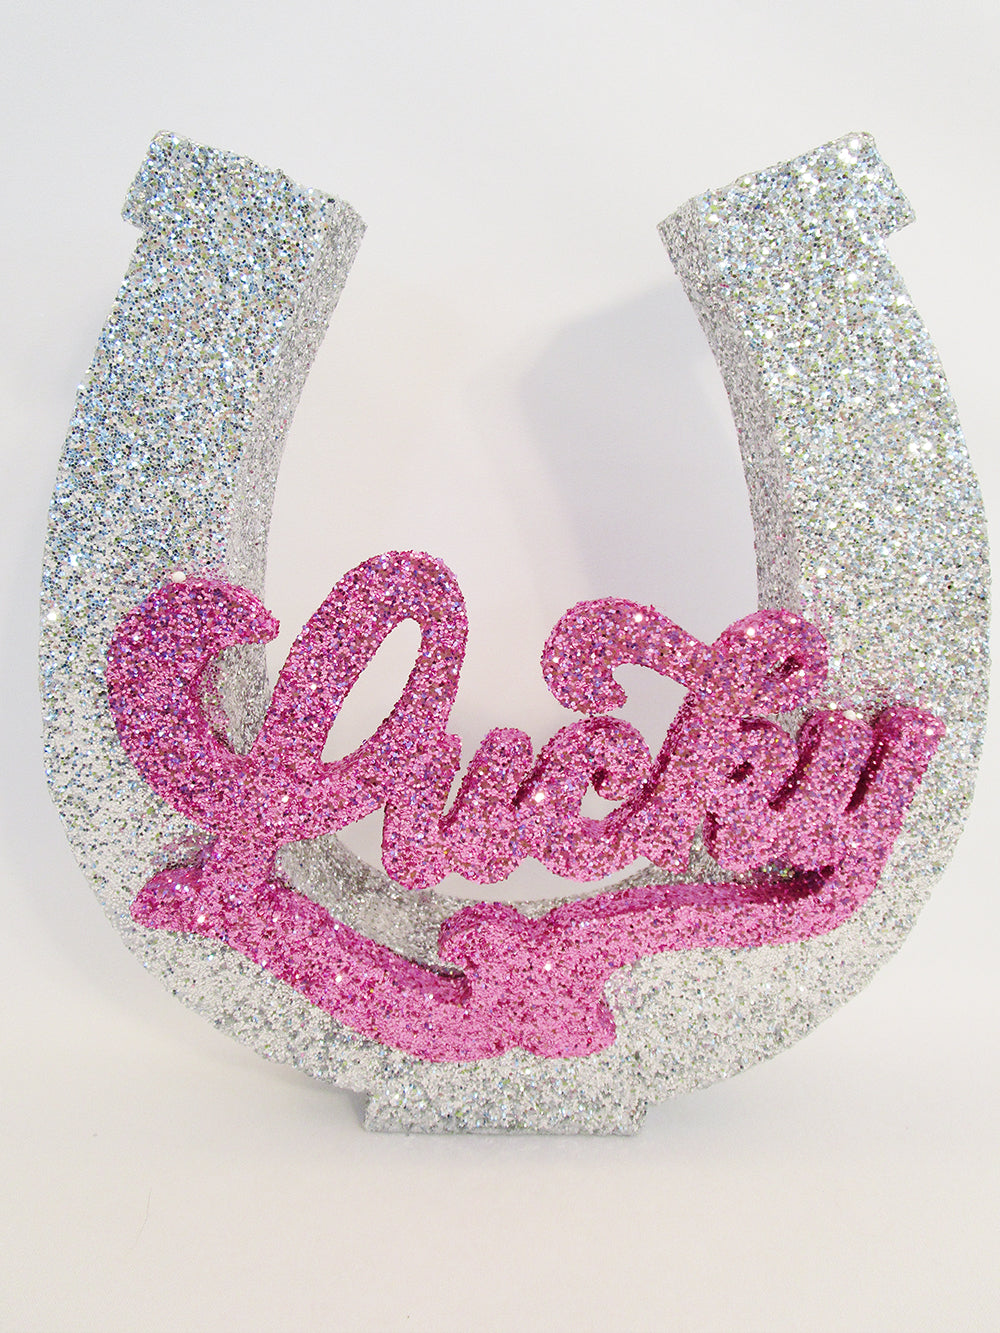 Lucky Horseshoe centerpiece - Designs by Ginny